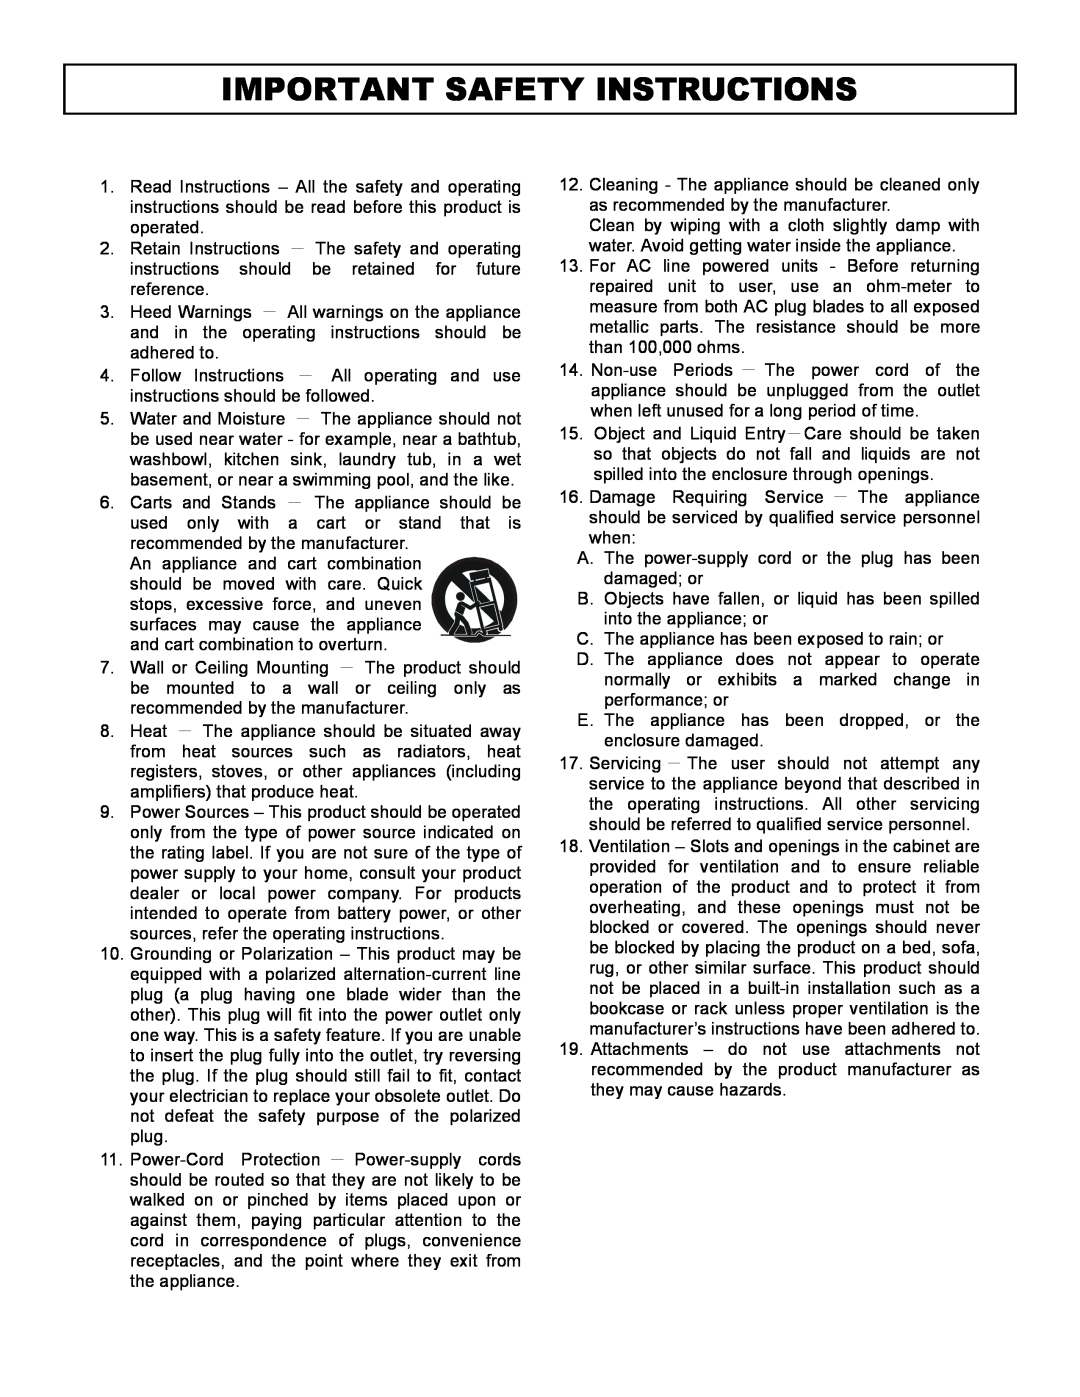 Stanton S.25O user manual Important Safety Instructions 